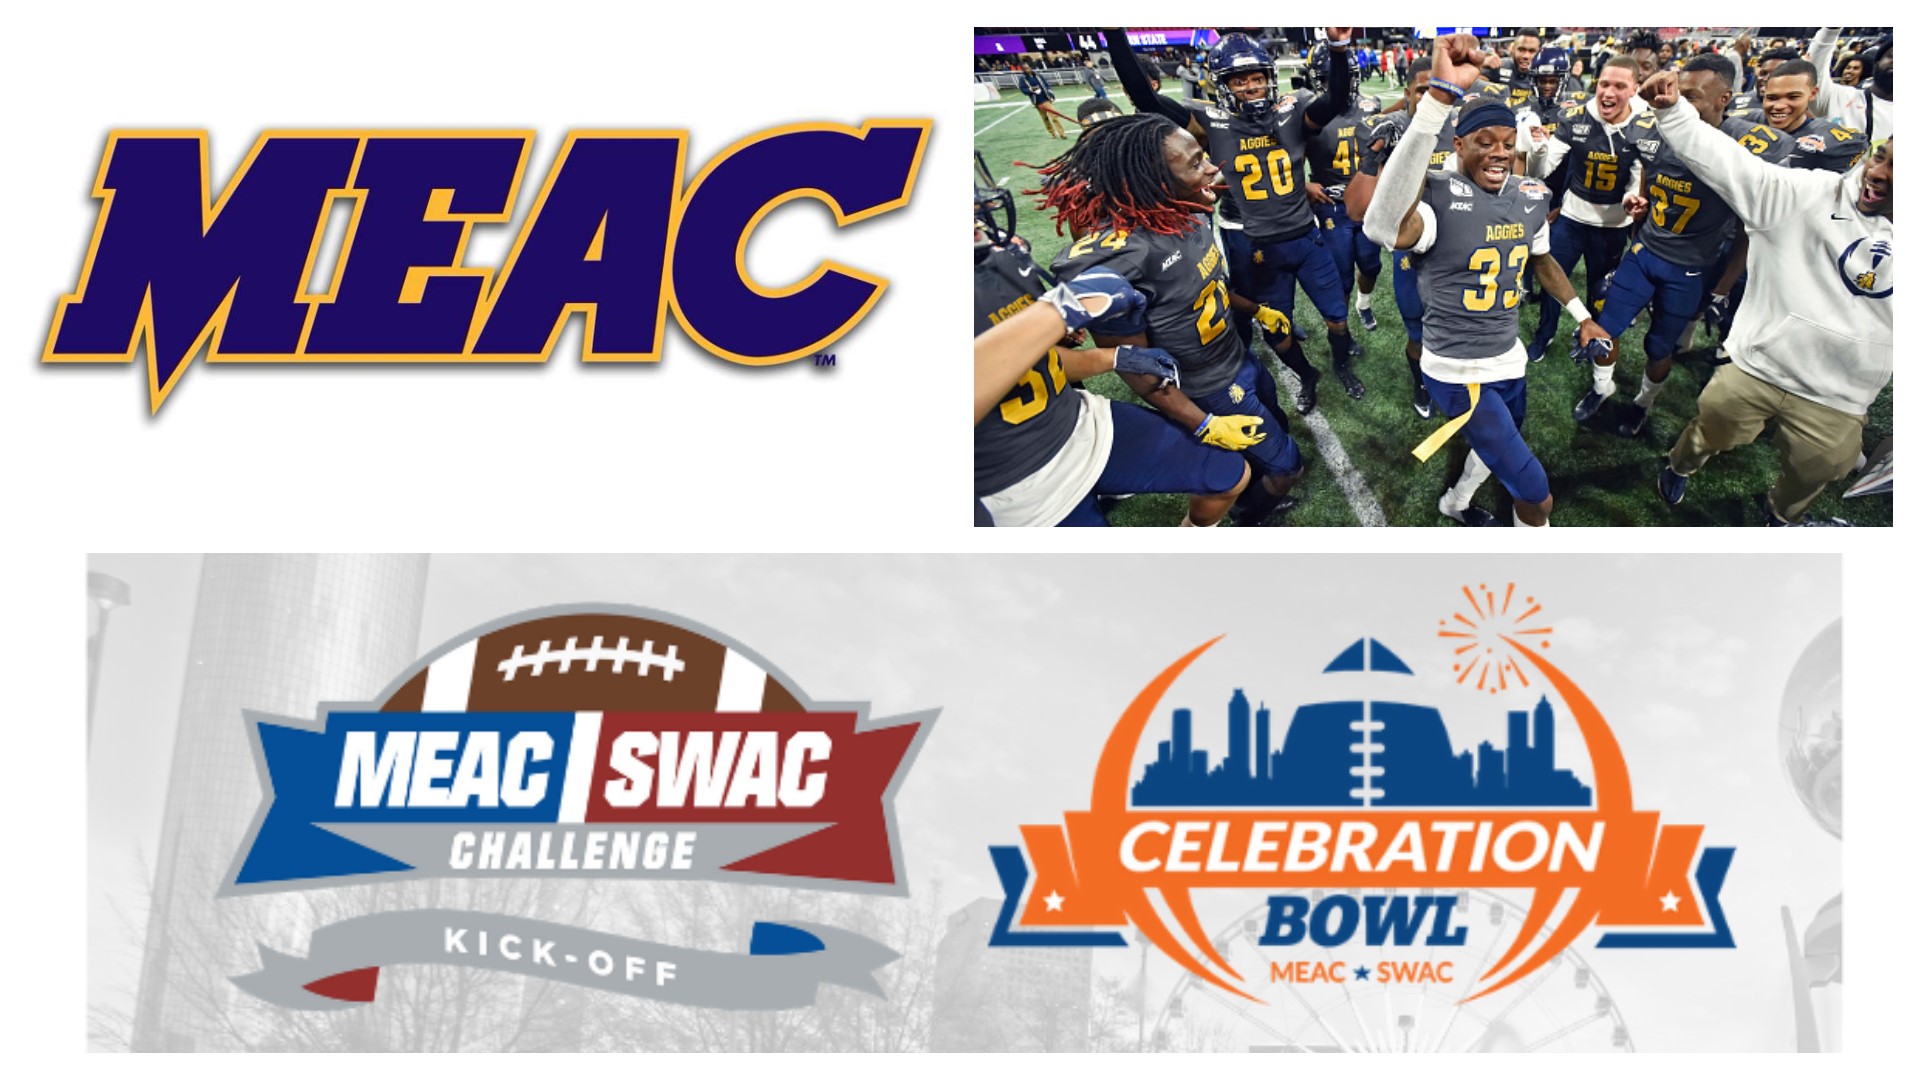 Following the MEAC's decision to suspend sports in 2020, ESPN Events announced that the MEAC/SWAC Challenge & Celebration Bowl will not be held this year either.